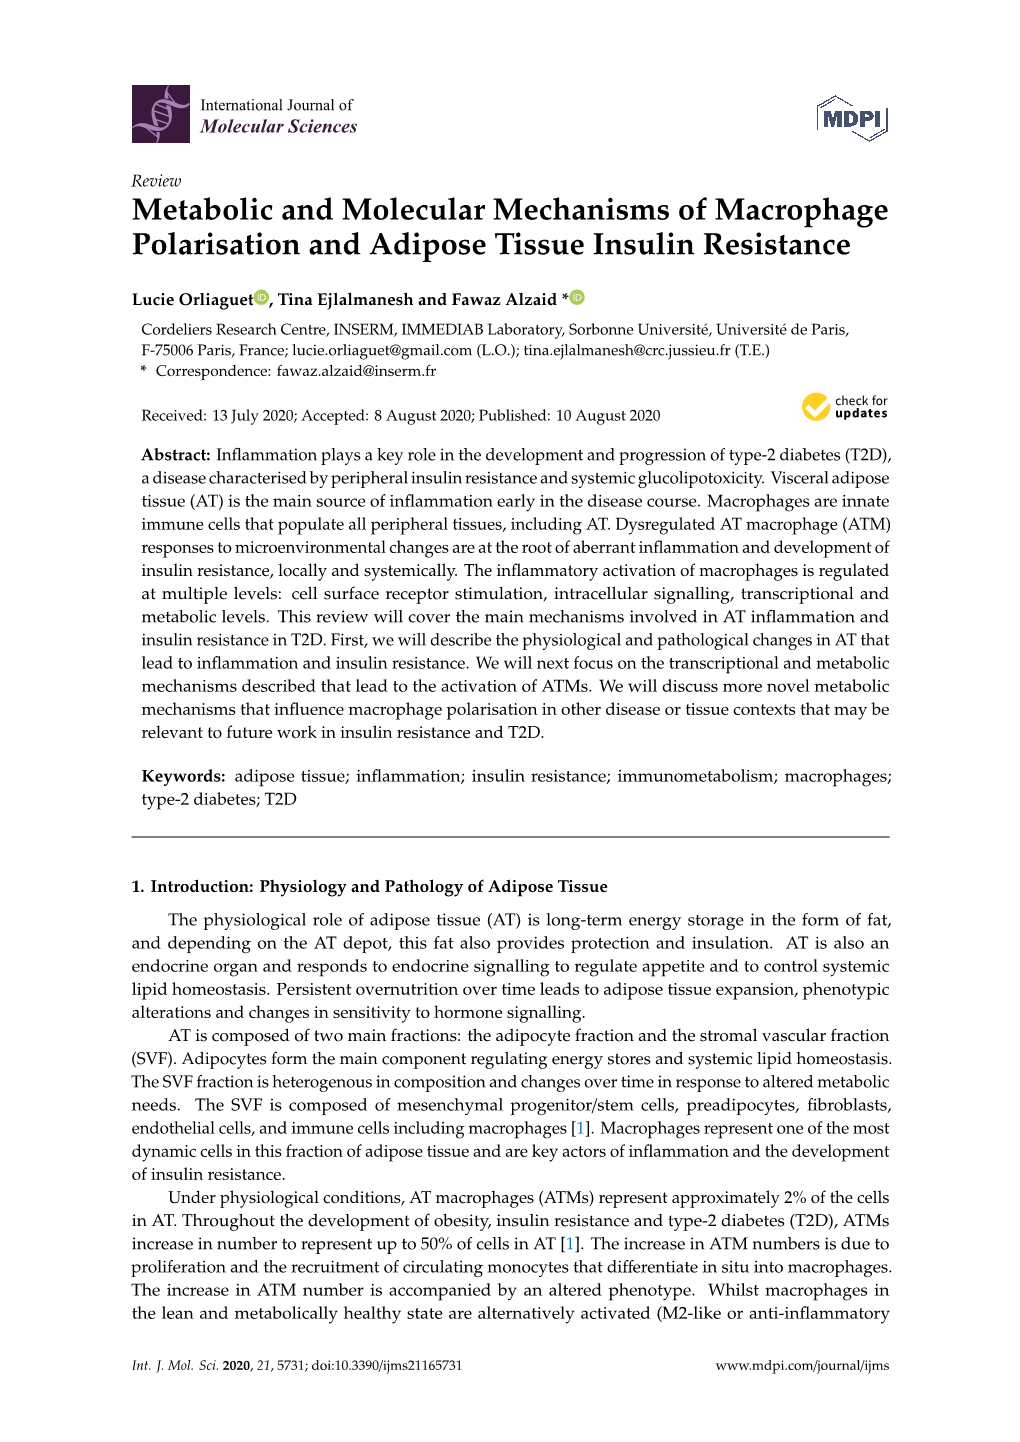 Metabolic and Molecular Mechanisms of Macrophage Polarisation and Adipose Tissue Insulin Resistance